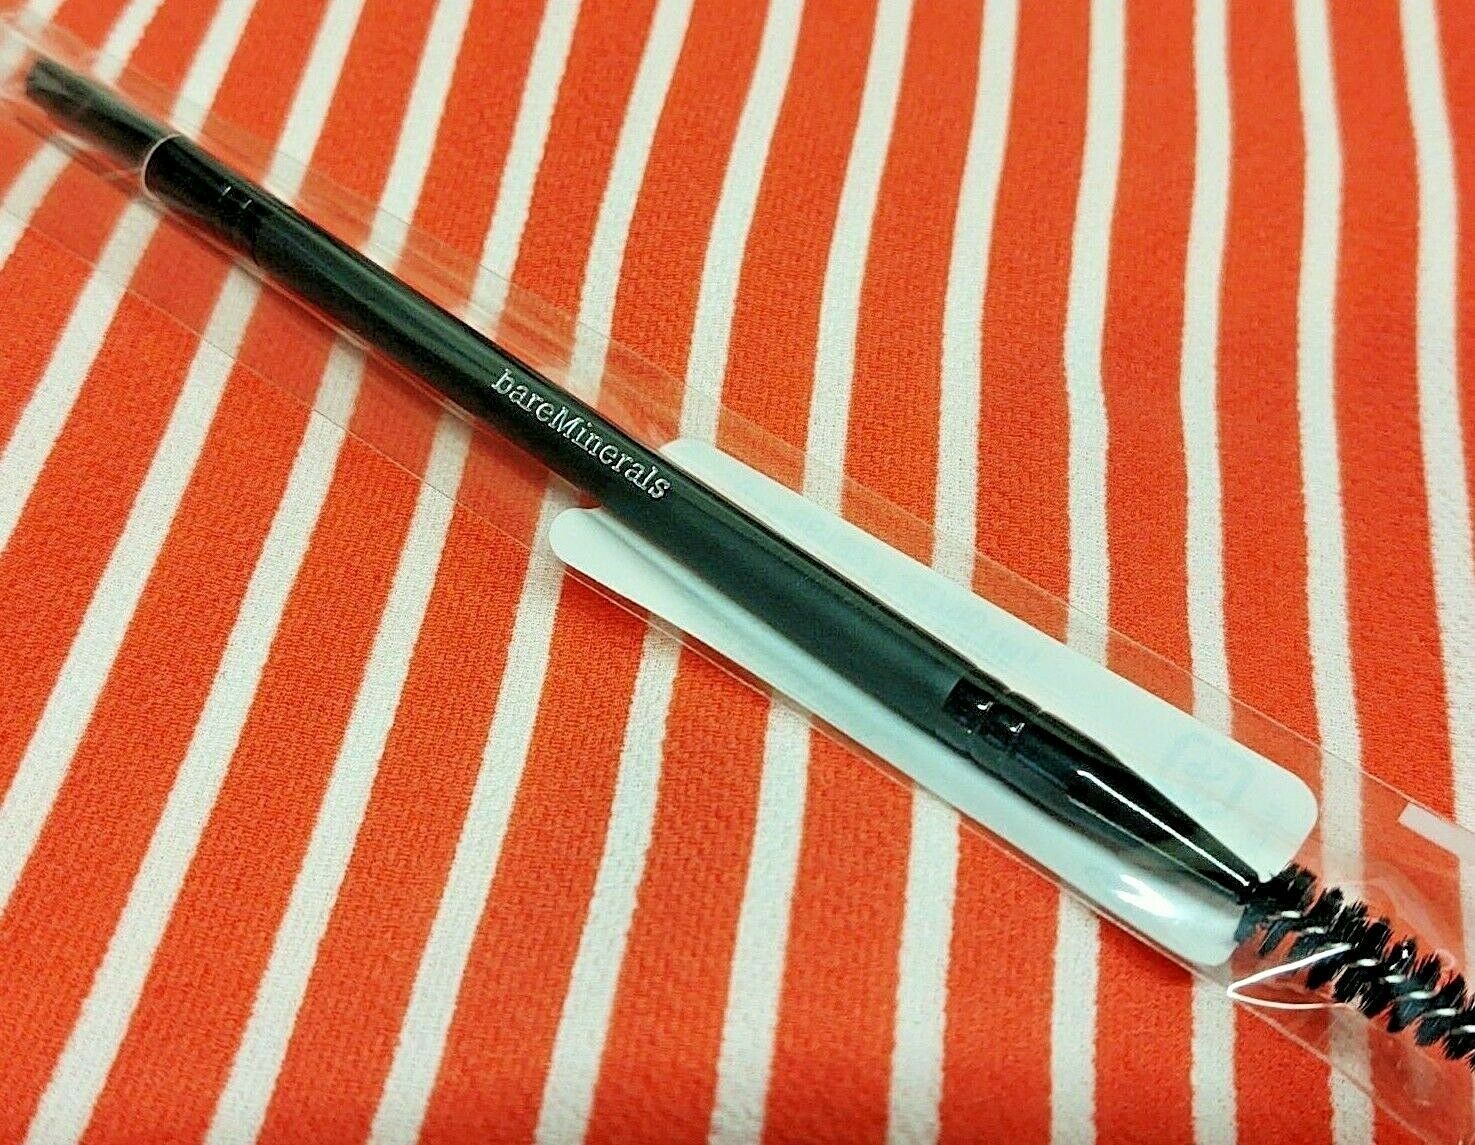 bareMinerals BROW MASTER BRUSH Eyebrow Double Ended Stiff Angle & Spoolie Define